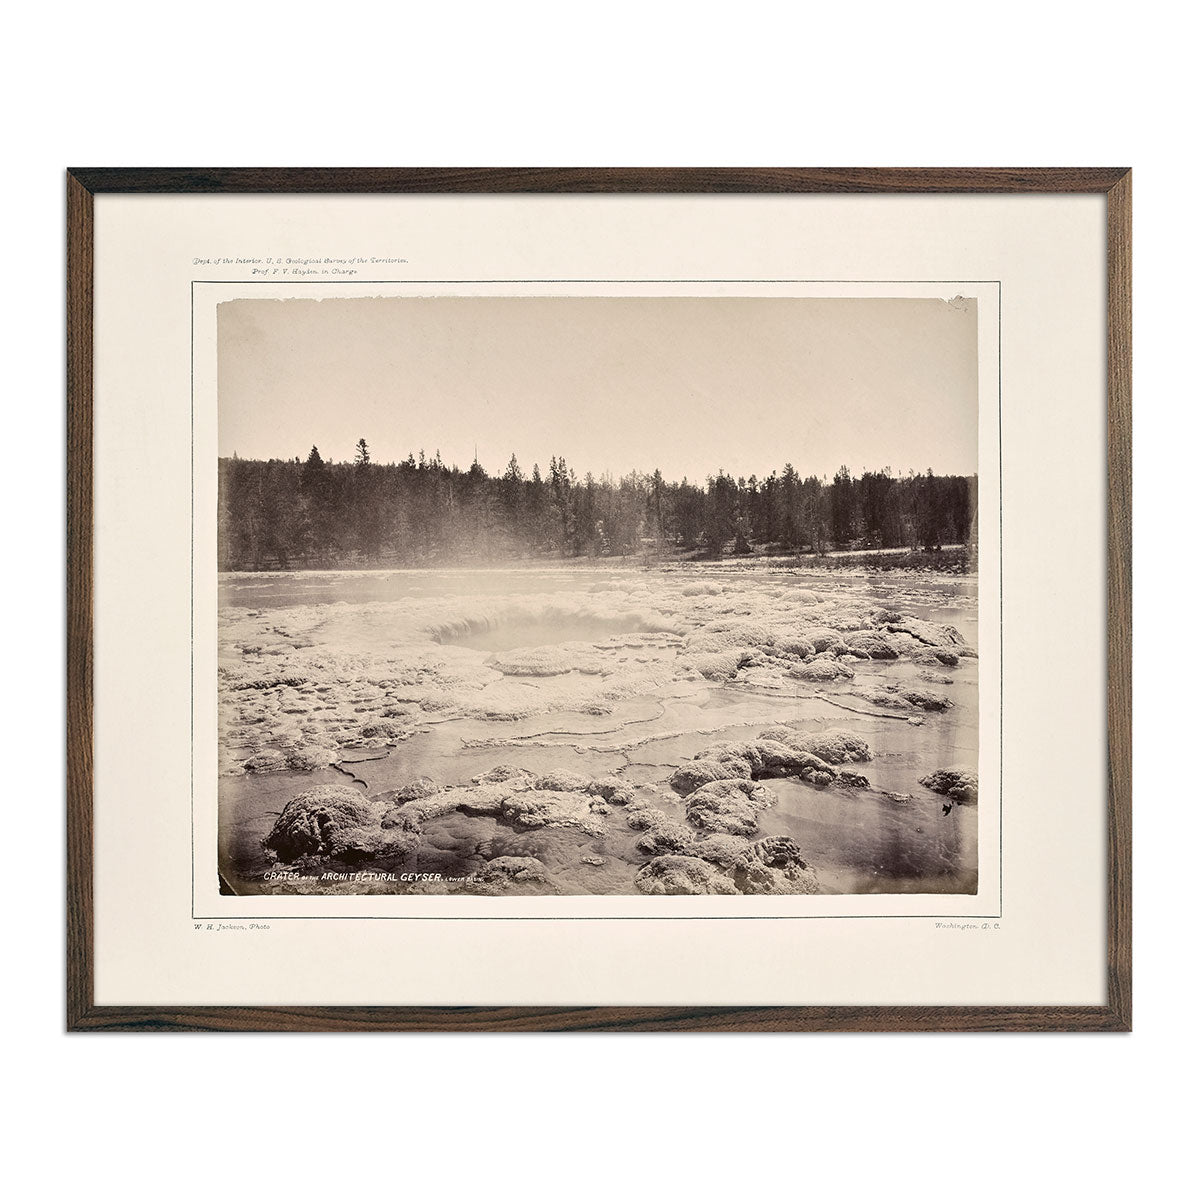 Photograph of Crater of the Architectural Geyser, Lower Basin